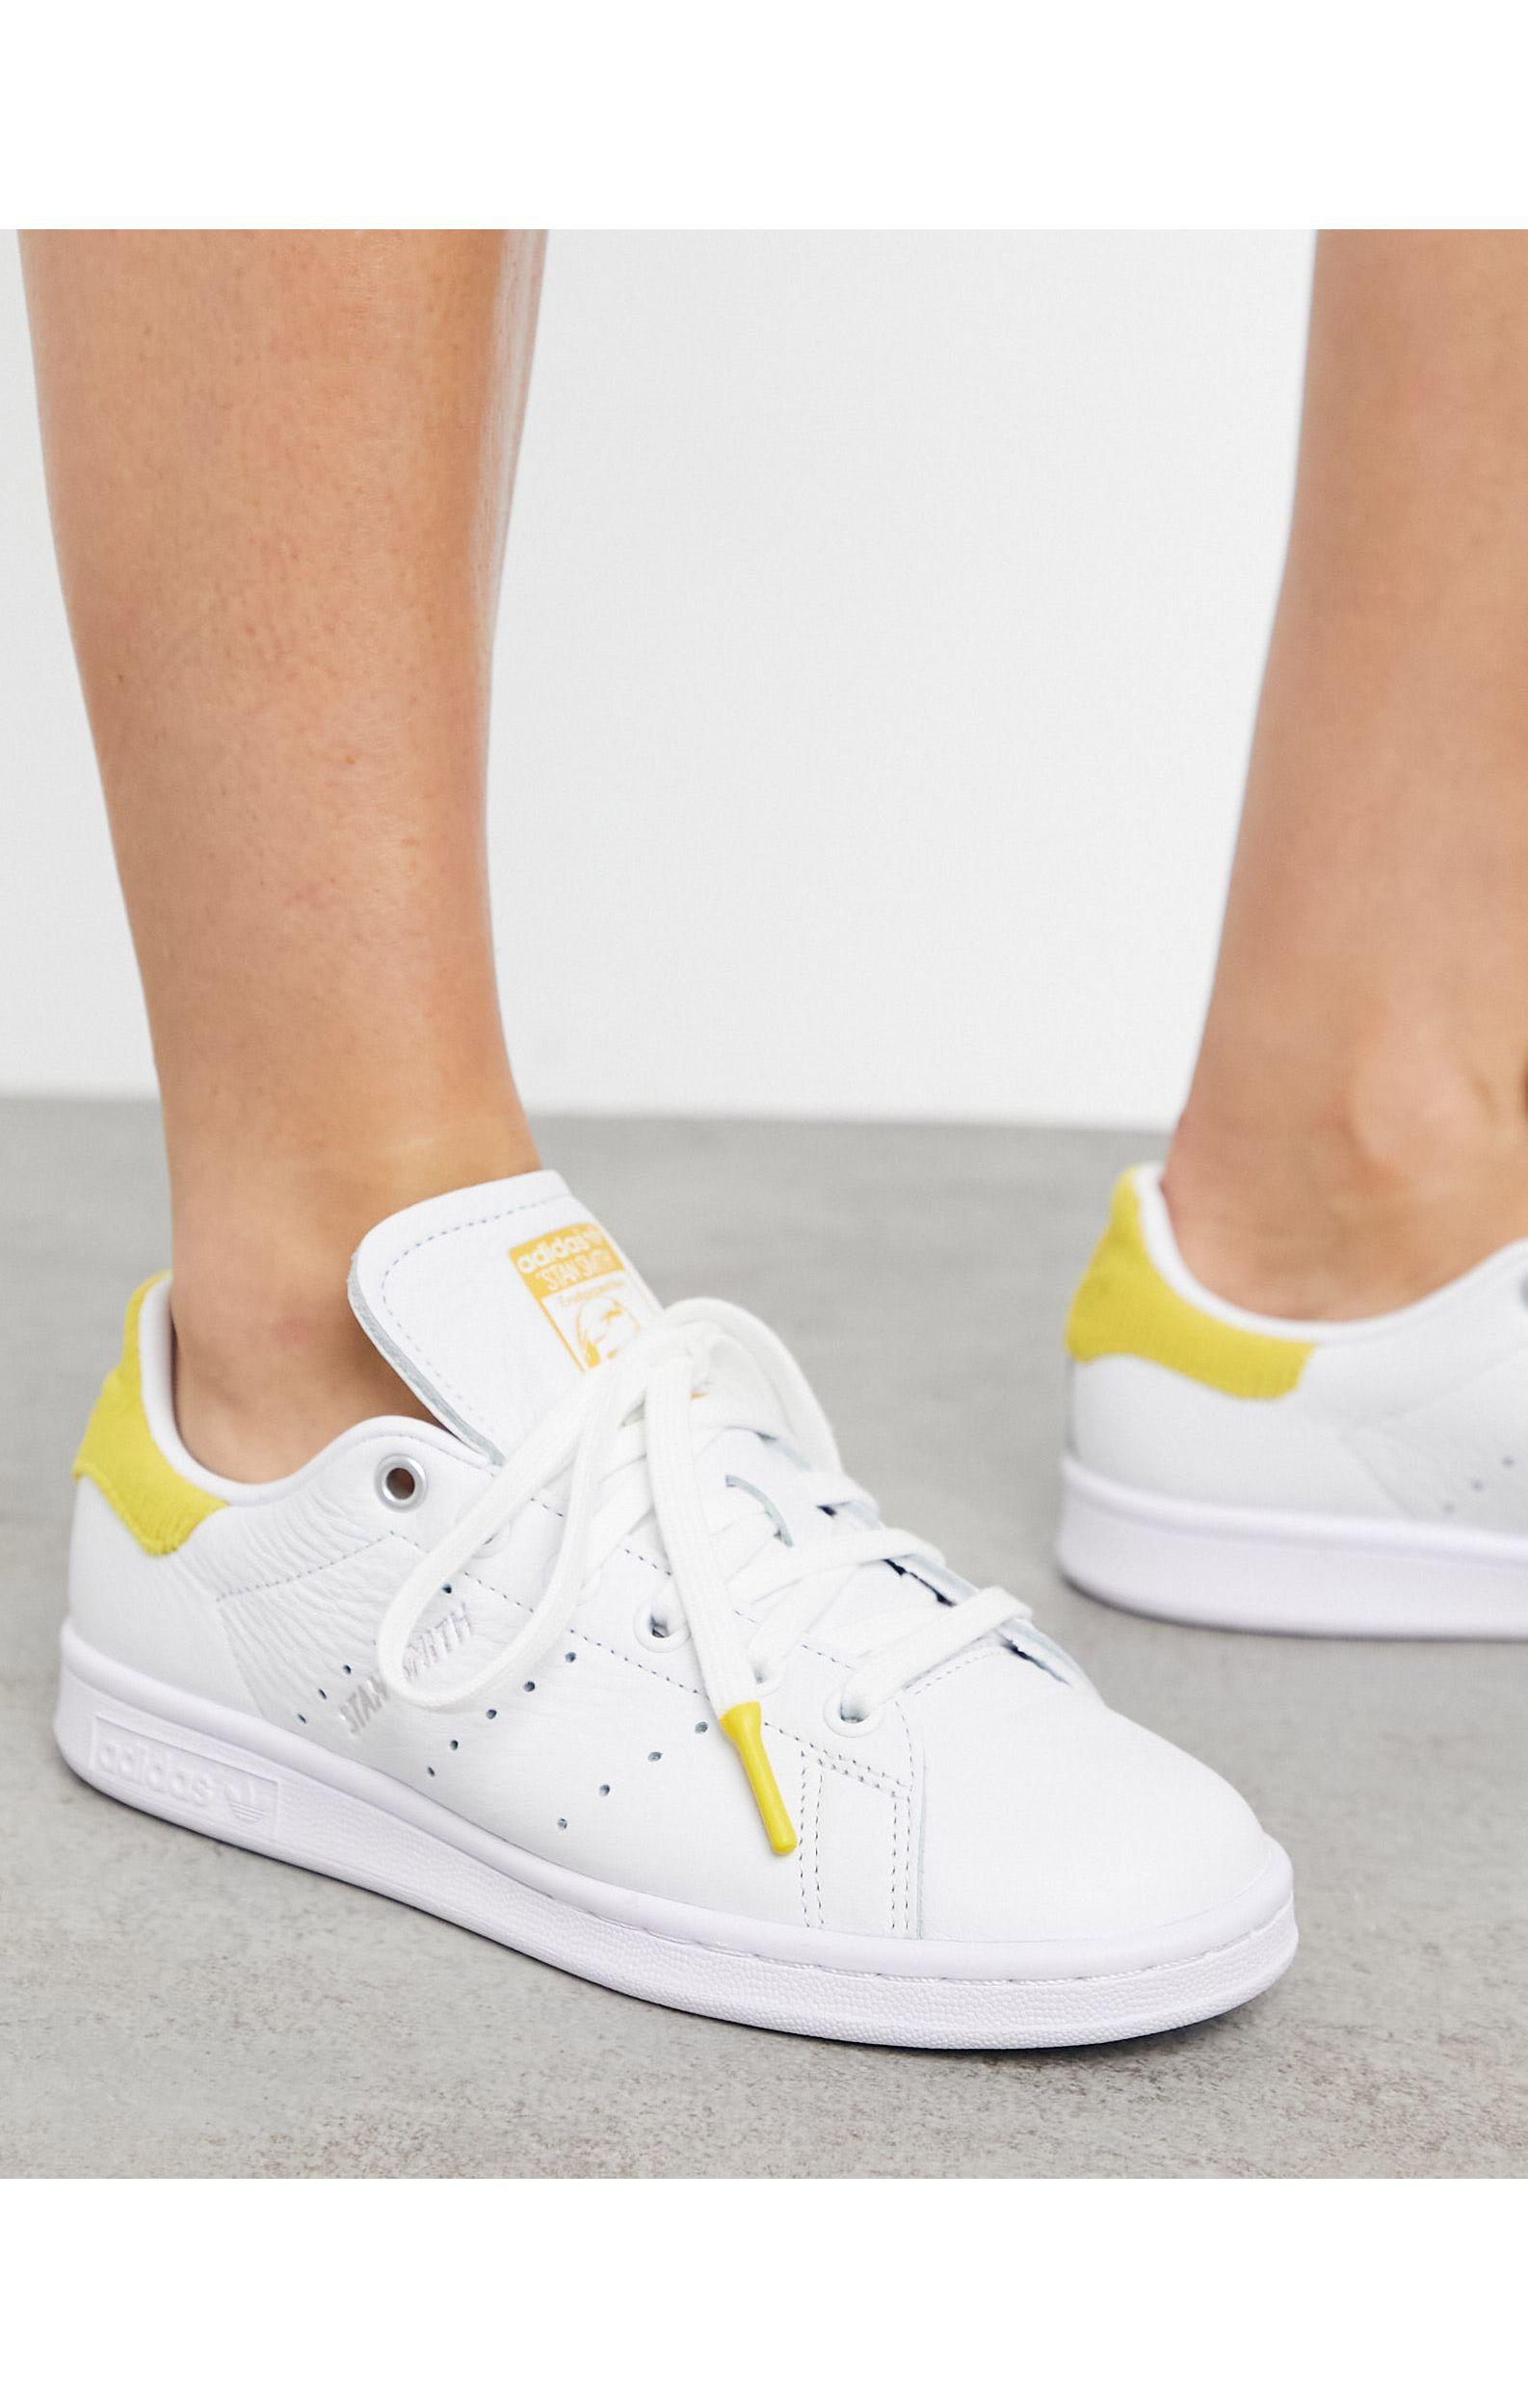 Stan Smith Velours Jaune on Sale, SAVE 36% - aveclumiere.com